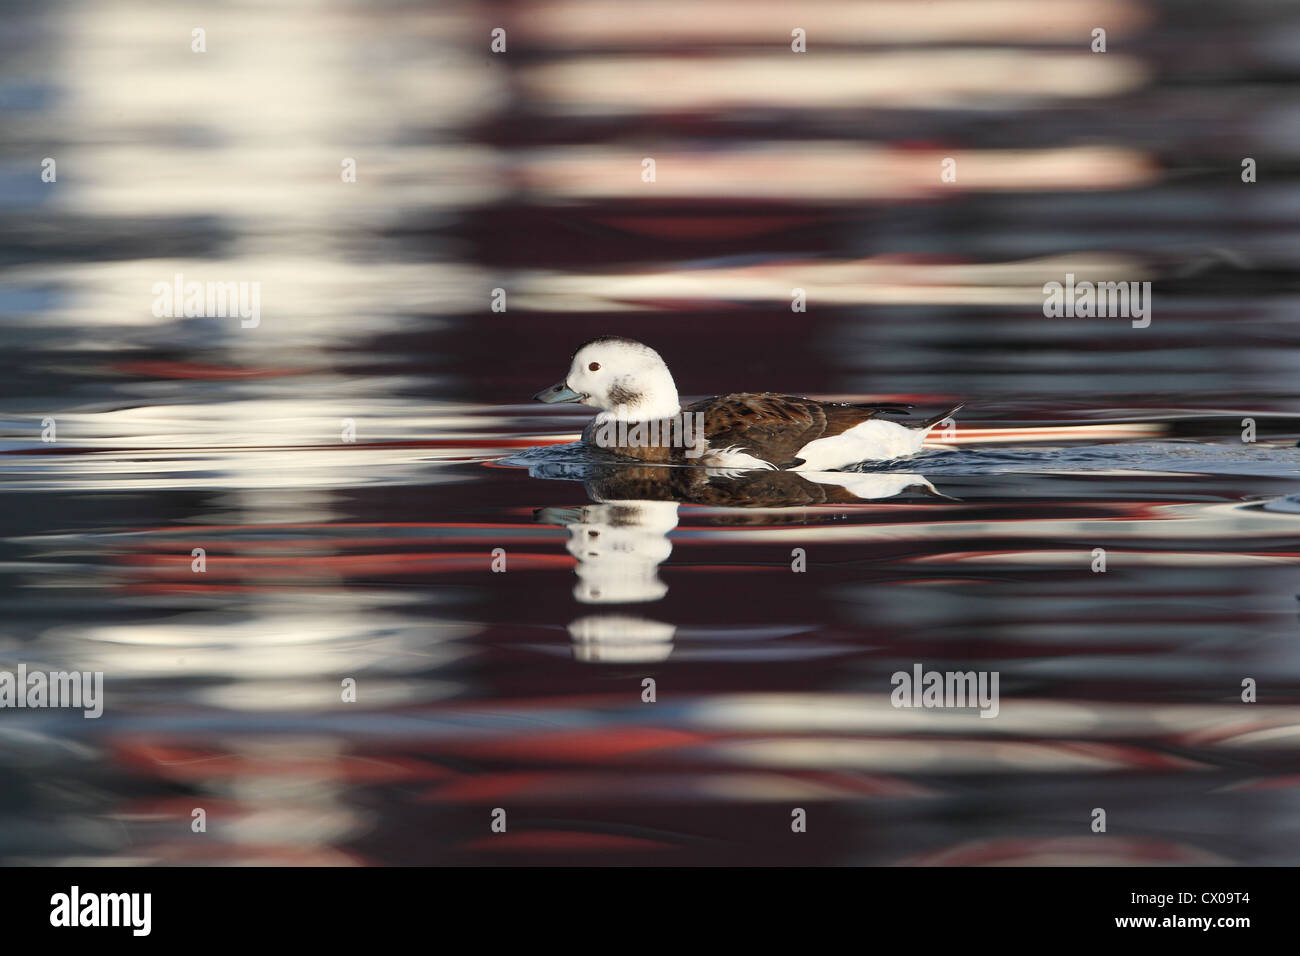 Long-tailed Duck / Harelde kakawi Clangula hyemalis Banque D'Images